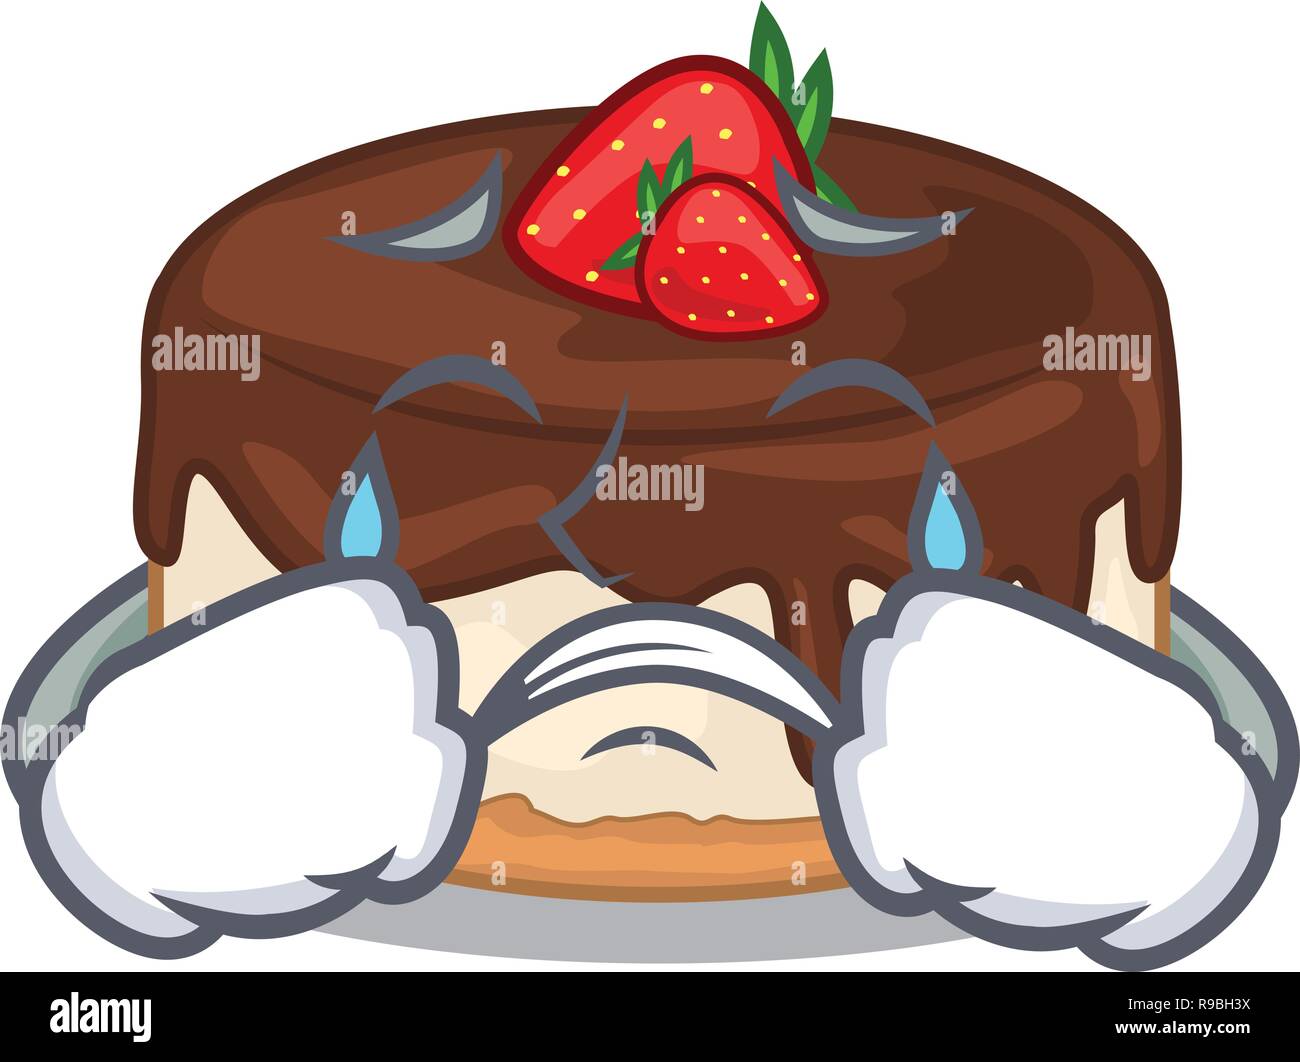 Crying berries cartoon cake on above table Stock Vector